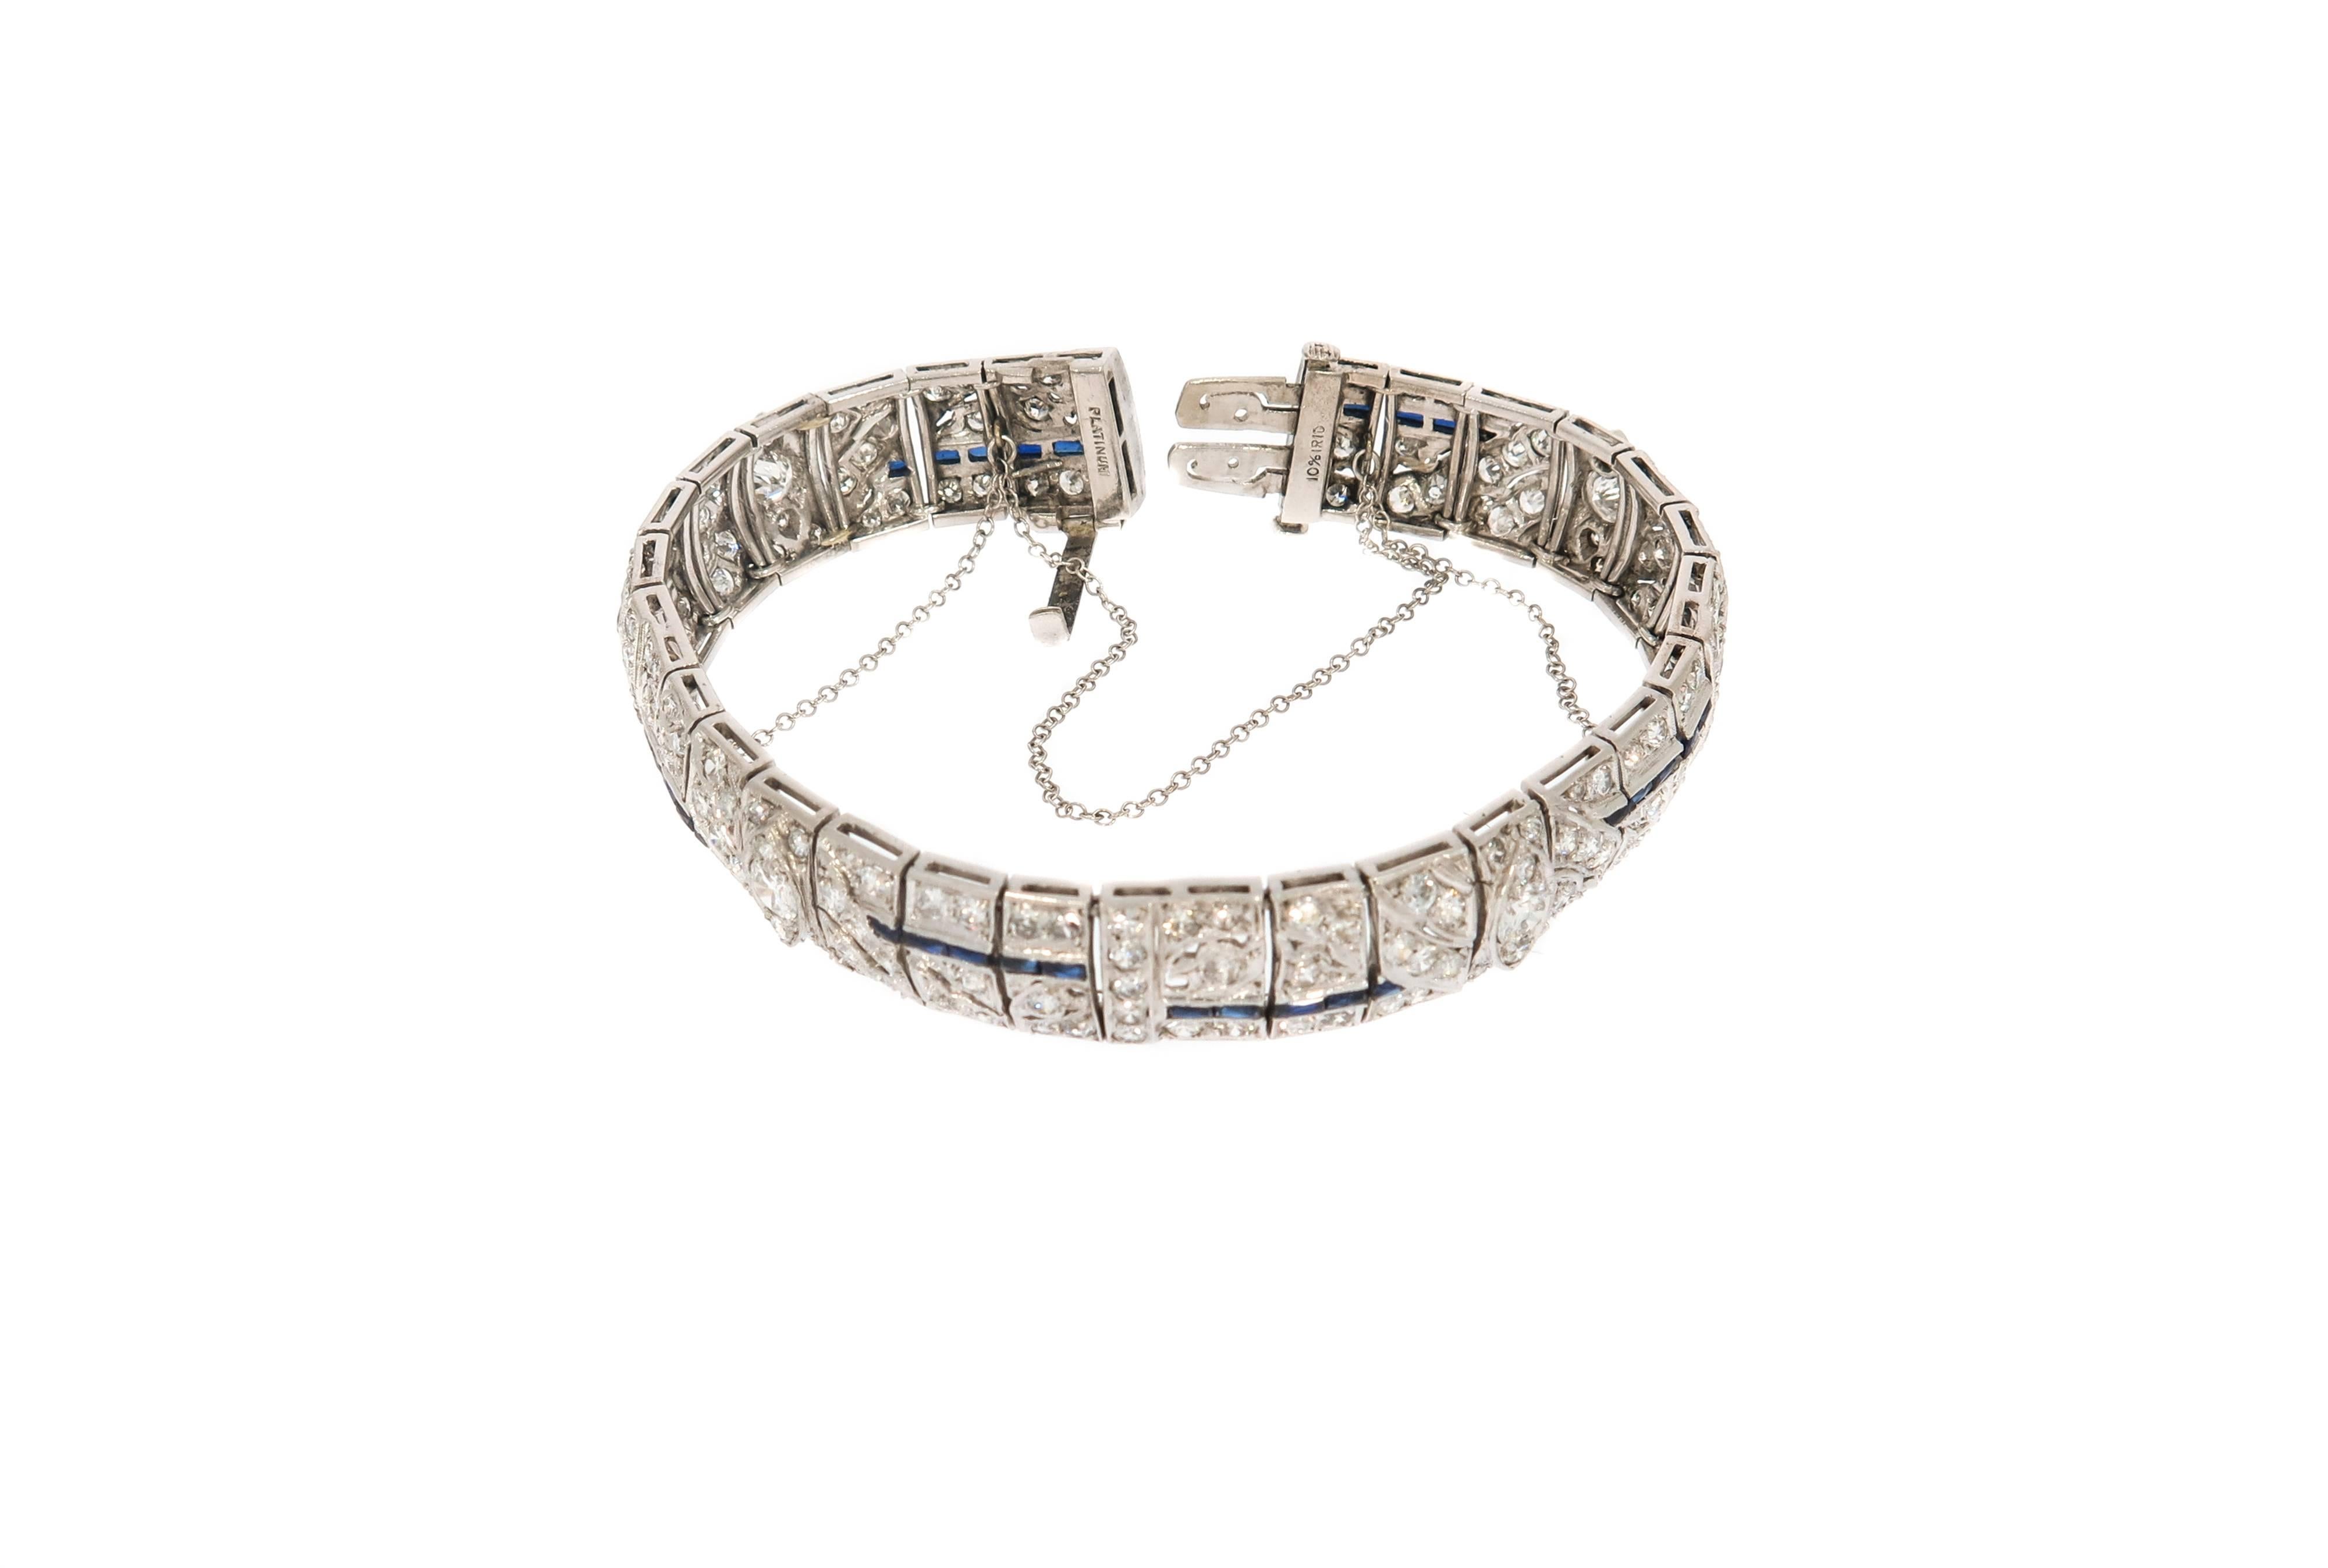 Architecturally-styled diamond bracelet, designed with round-cut diamonds and faceted baguette-cut blue sapphires meeting in an exceptional vintage design. Beautiful motif of round-cut diamonds, accented with straight design pattern of faceted